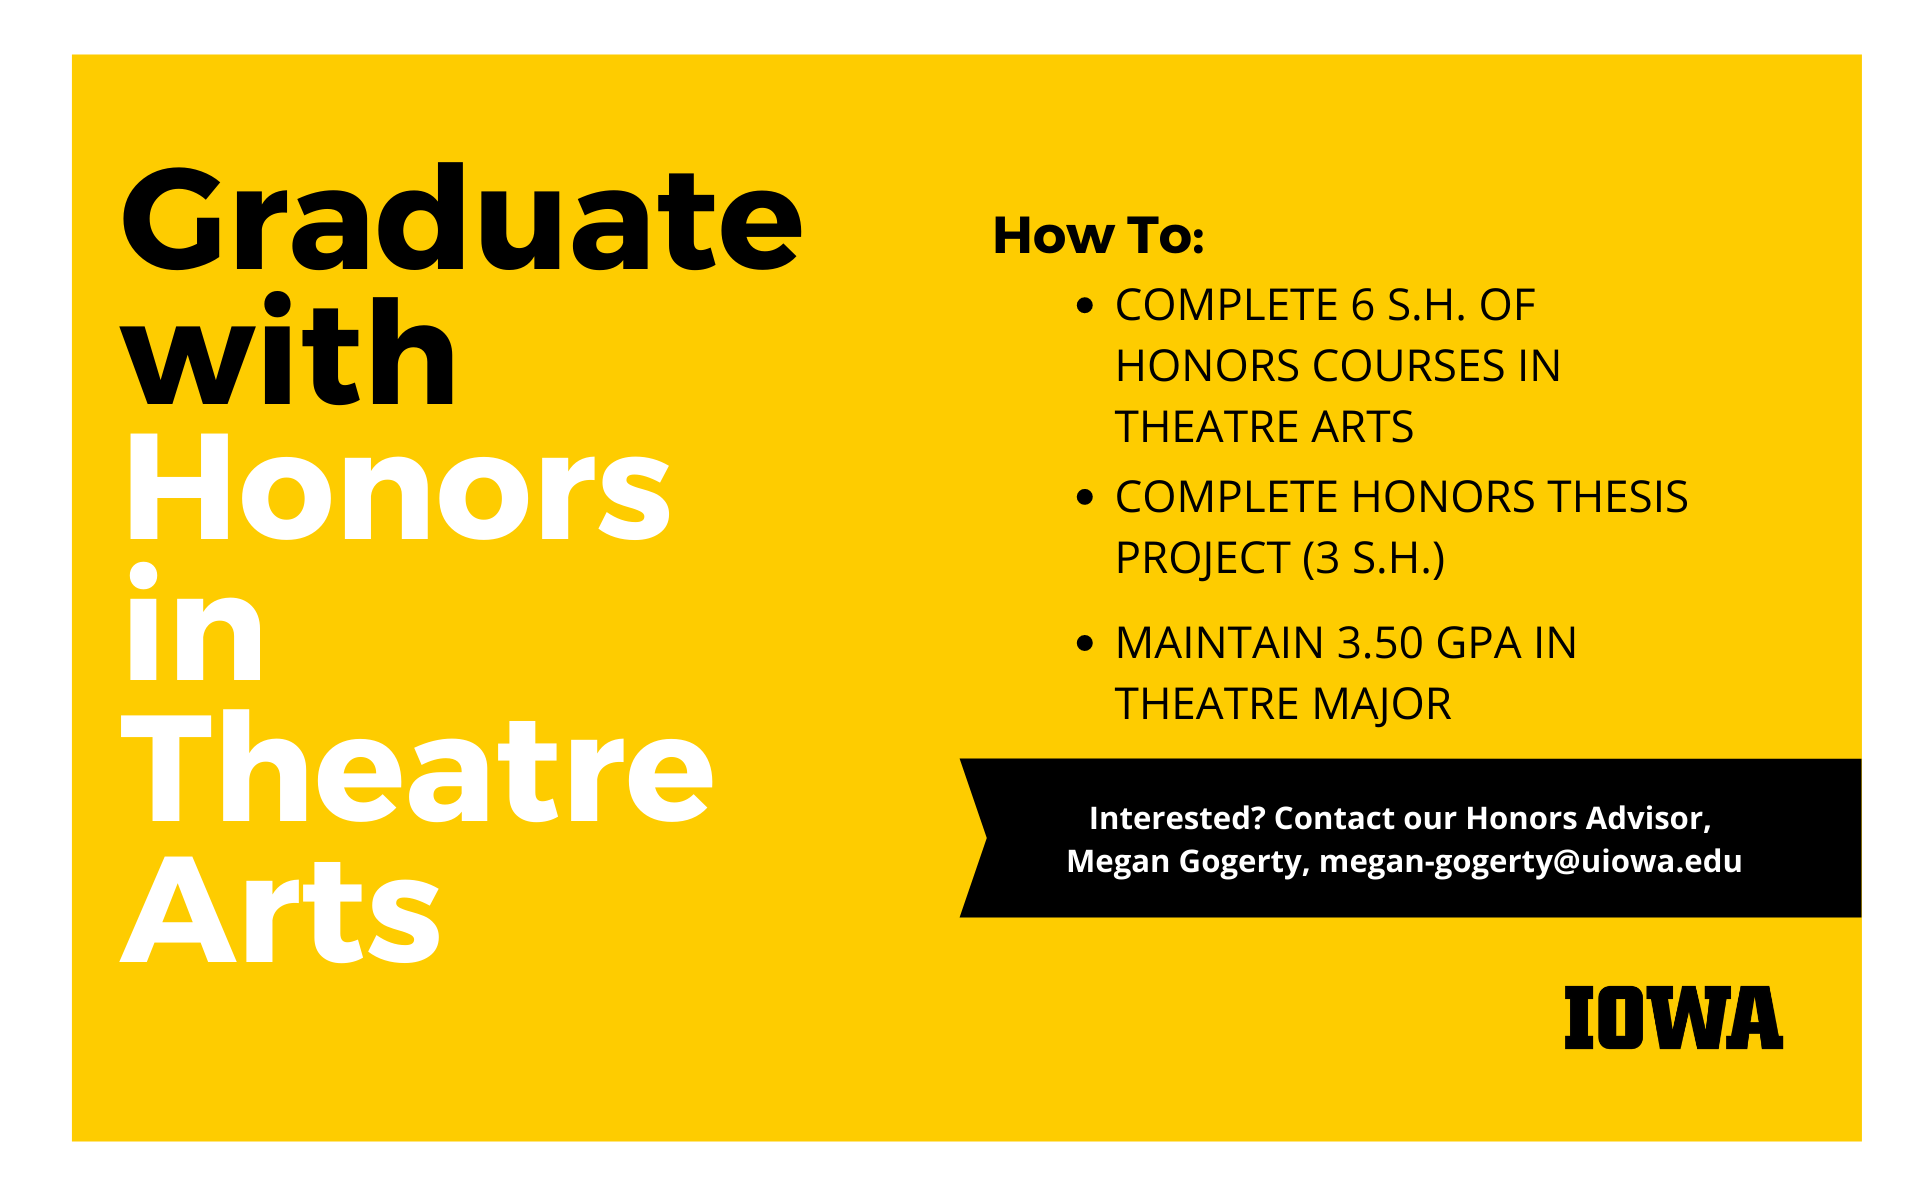 Graduate with Honors in Theatre Arts